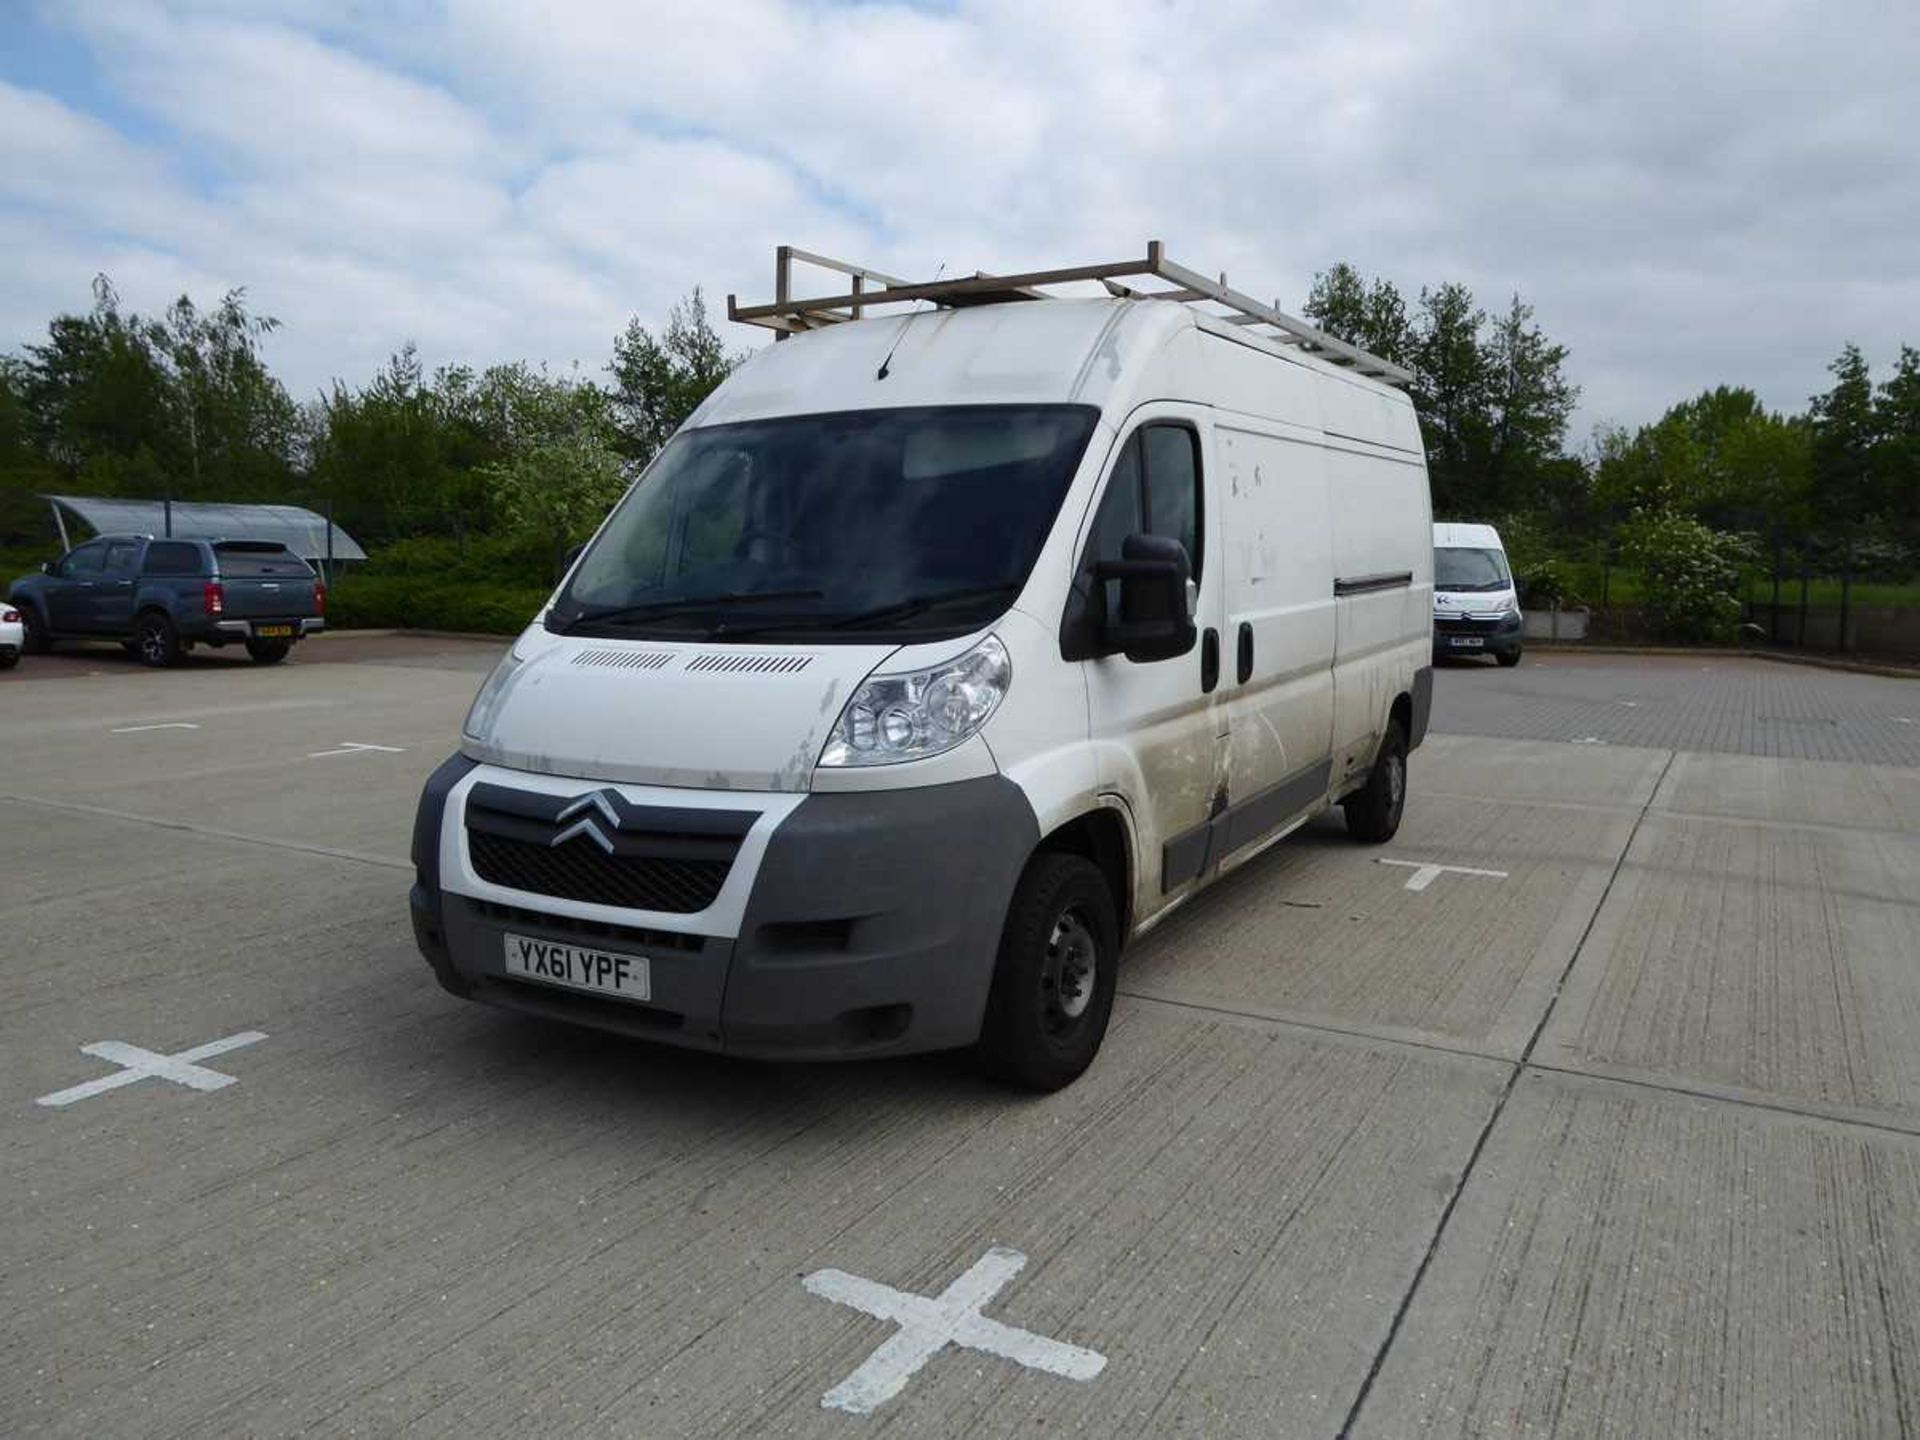 (YX61 YPF) 2011 Citroen Relay 35 L3H2 Enterprise Blue HDi panel van in white with frail, 2198cc - Image 3 of 15